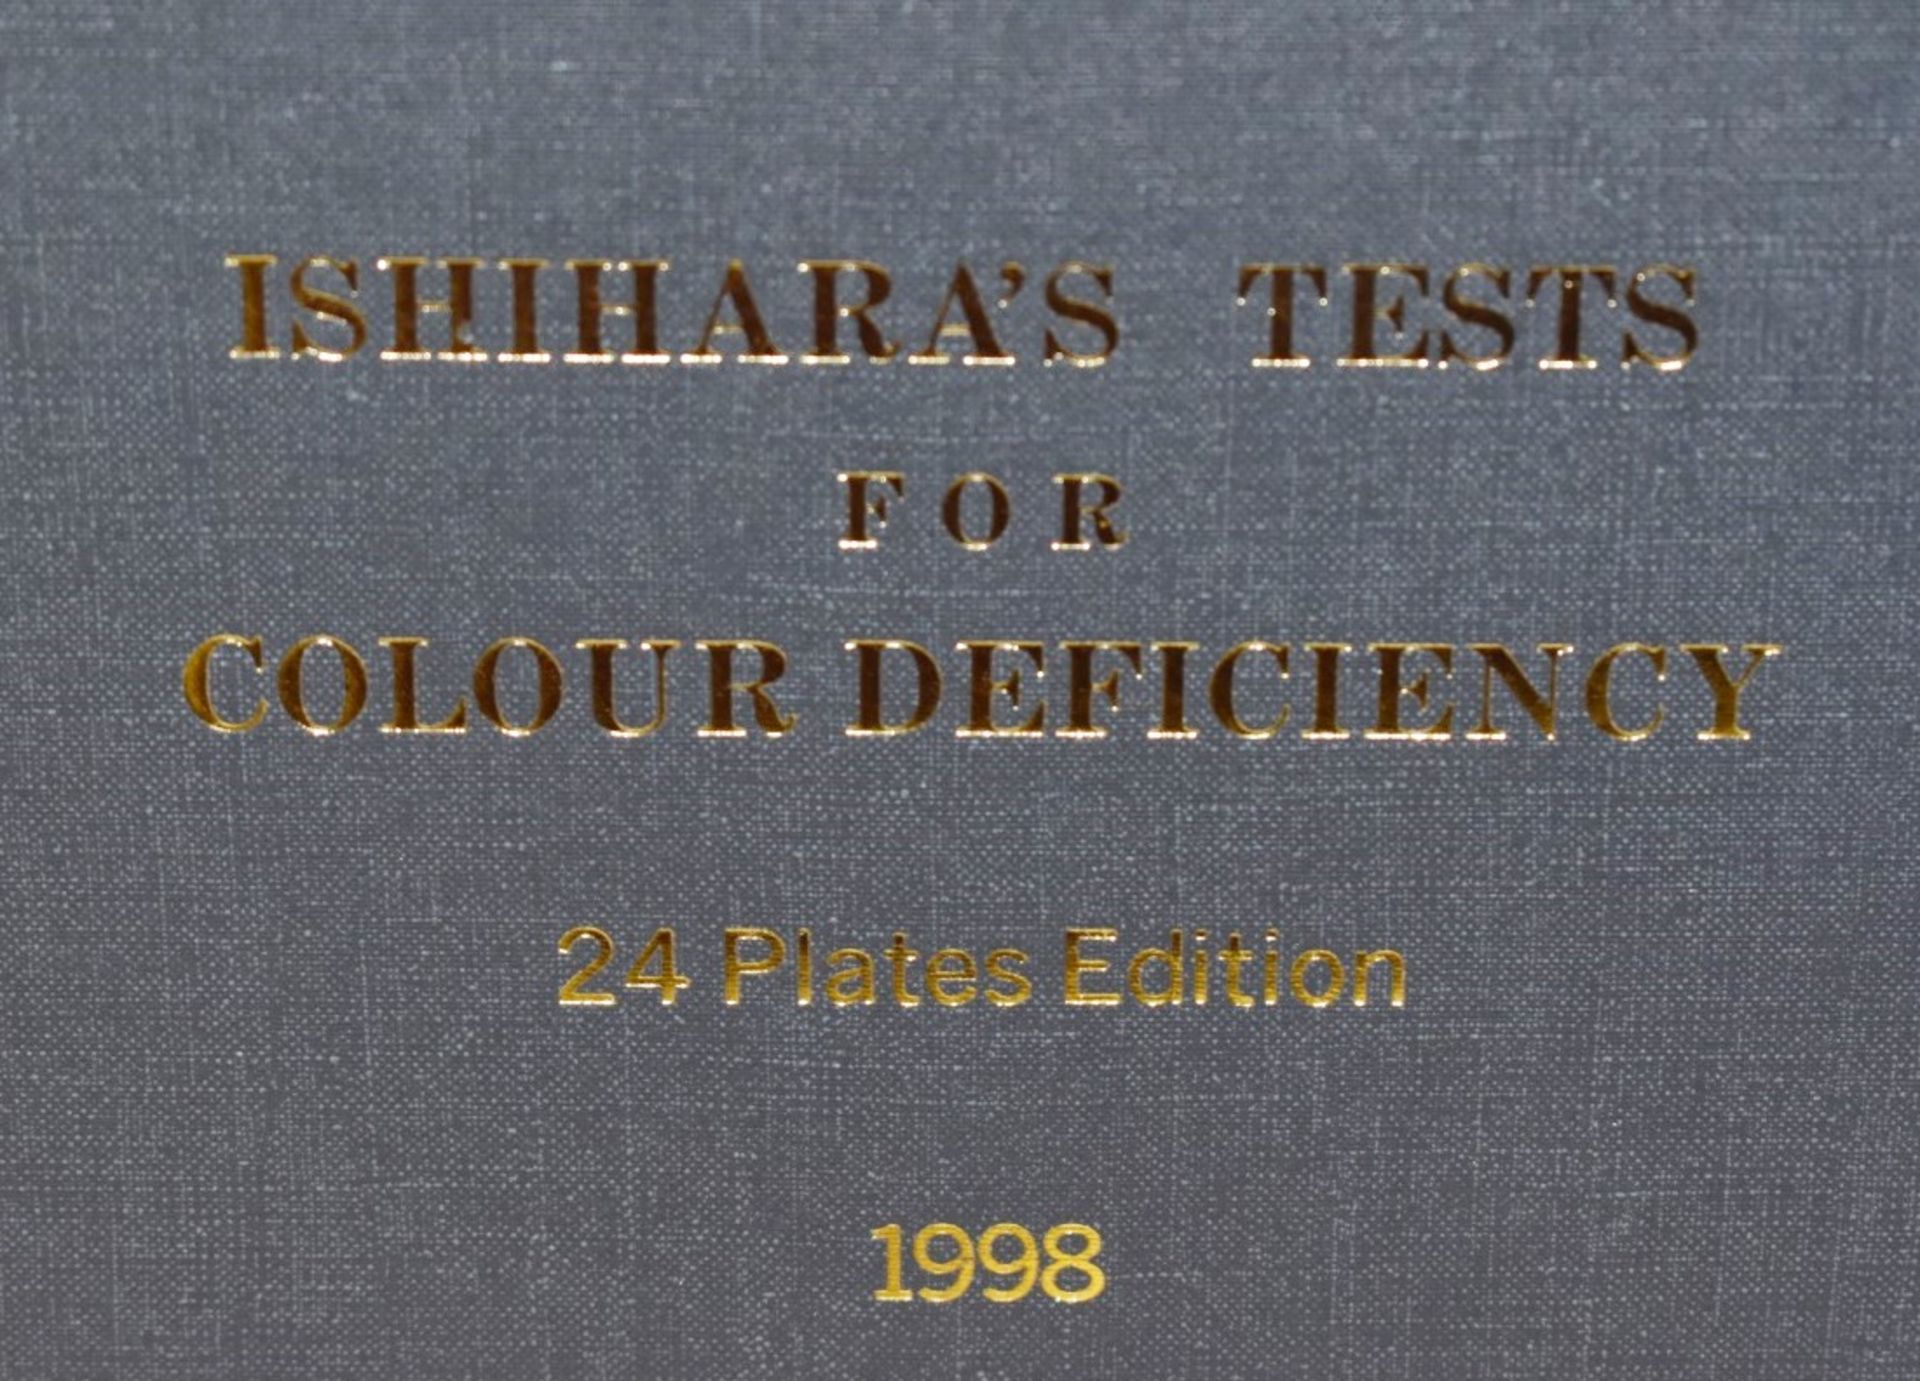 2 x Eye Chart Books Including Ishihara's Tests For Colour Deficiency and Amsler Charts Manual - Ref: - Image 4 of 13